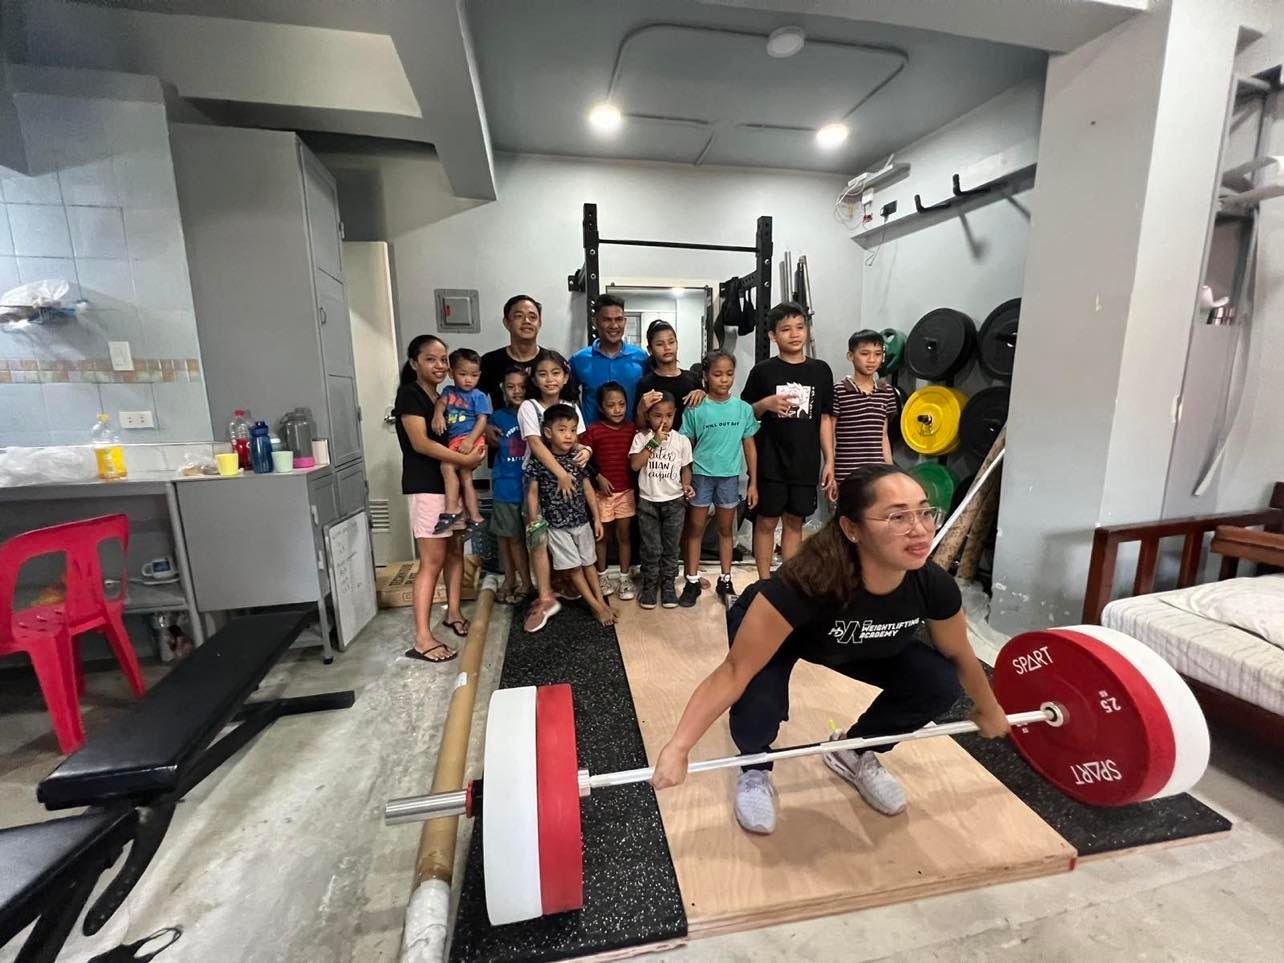 Tokyo Olympics gold medalist Hidilyn Diaz shows her lifting form during a weightlifting equipment donation at Manila Weightlifting Club in Tondo, Manila